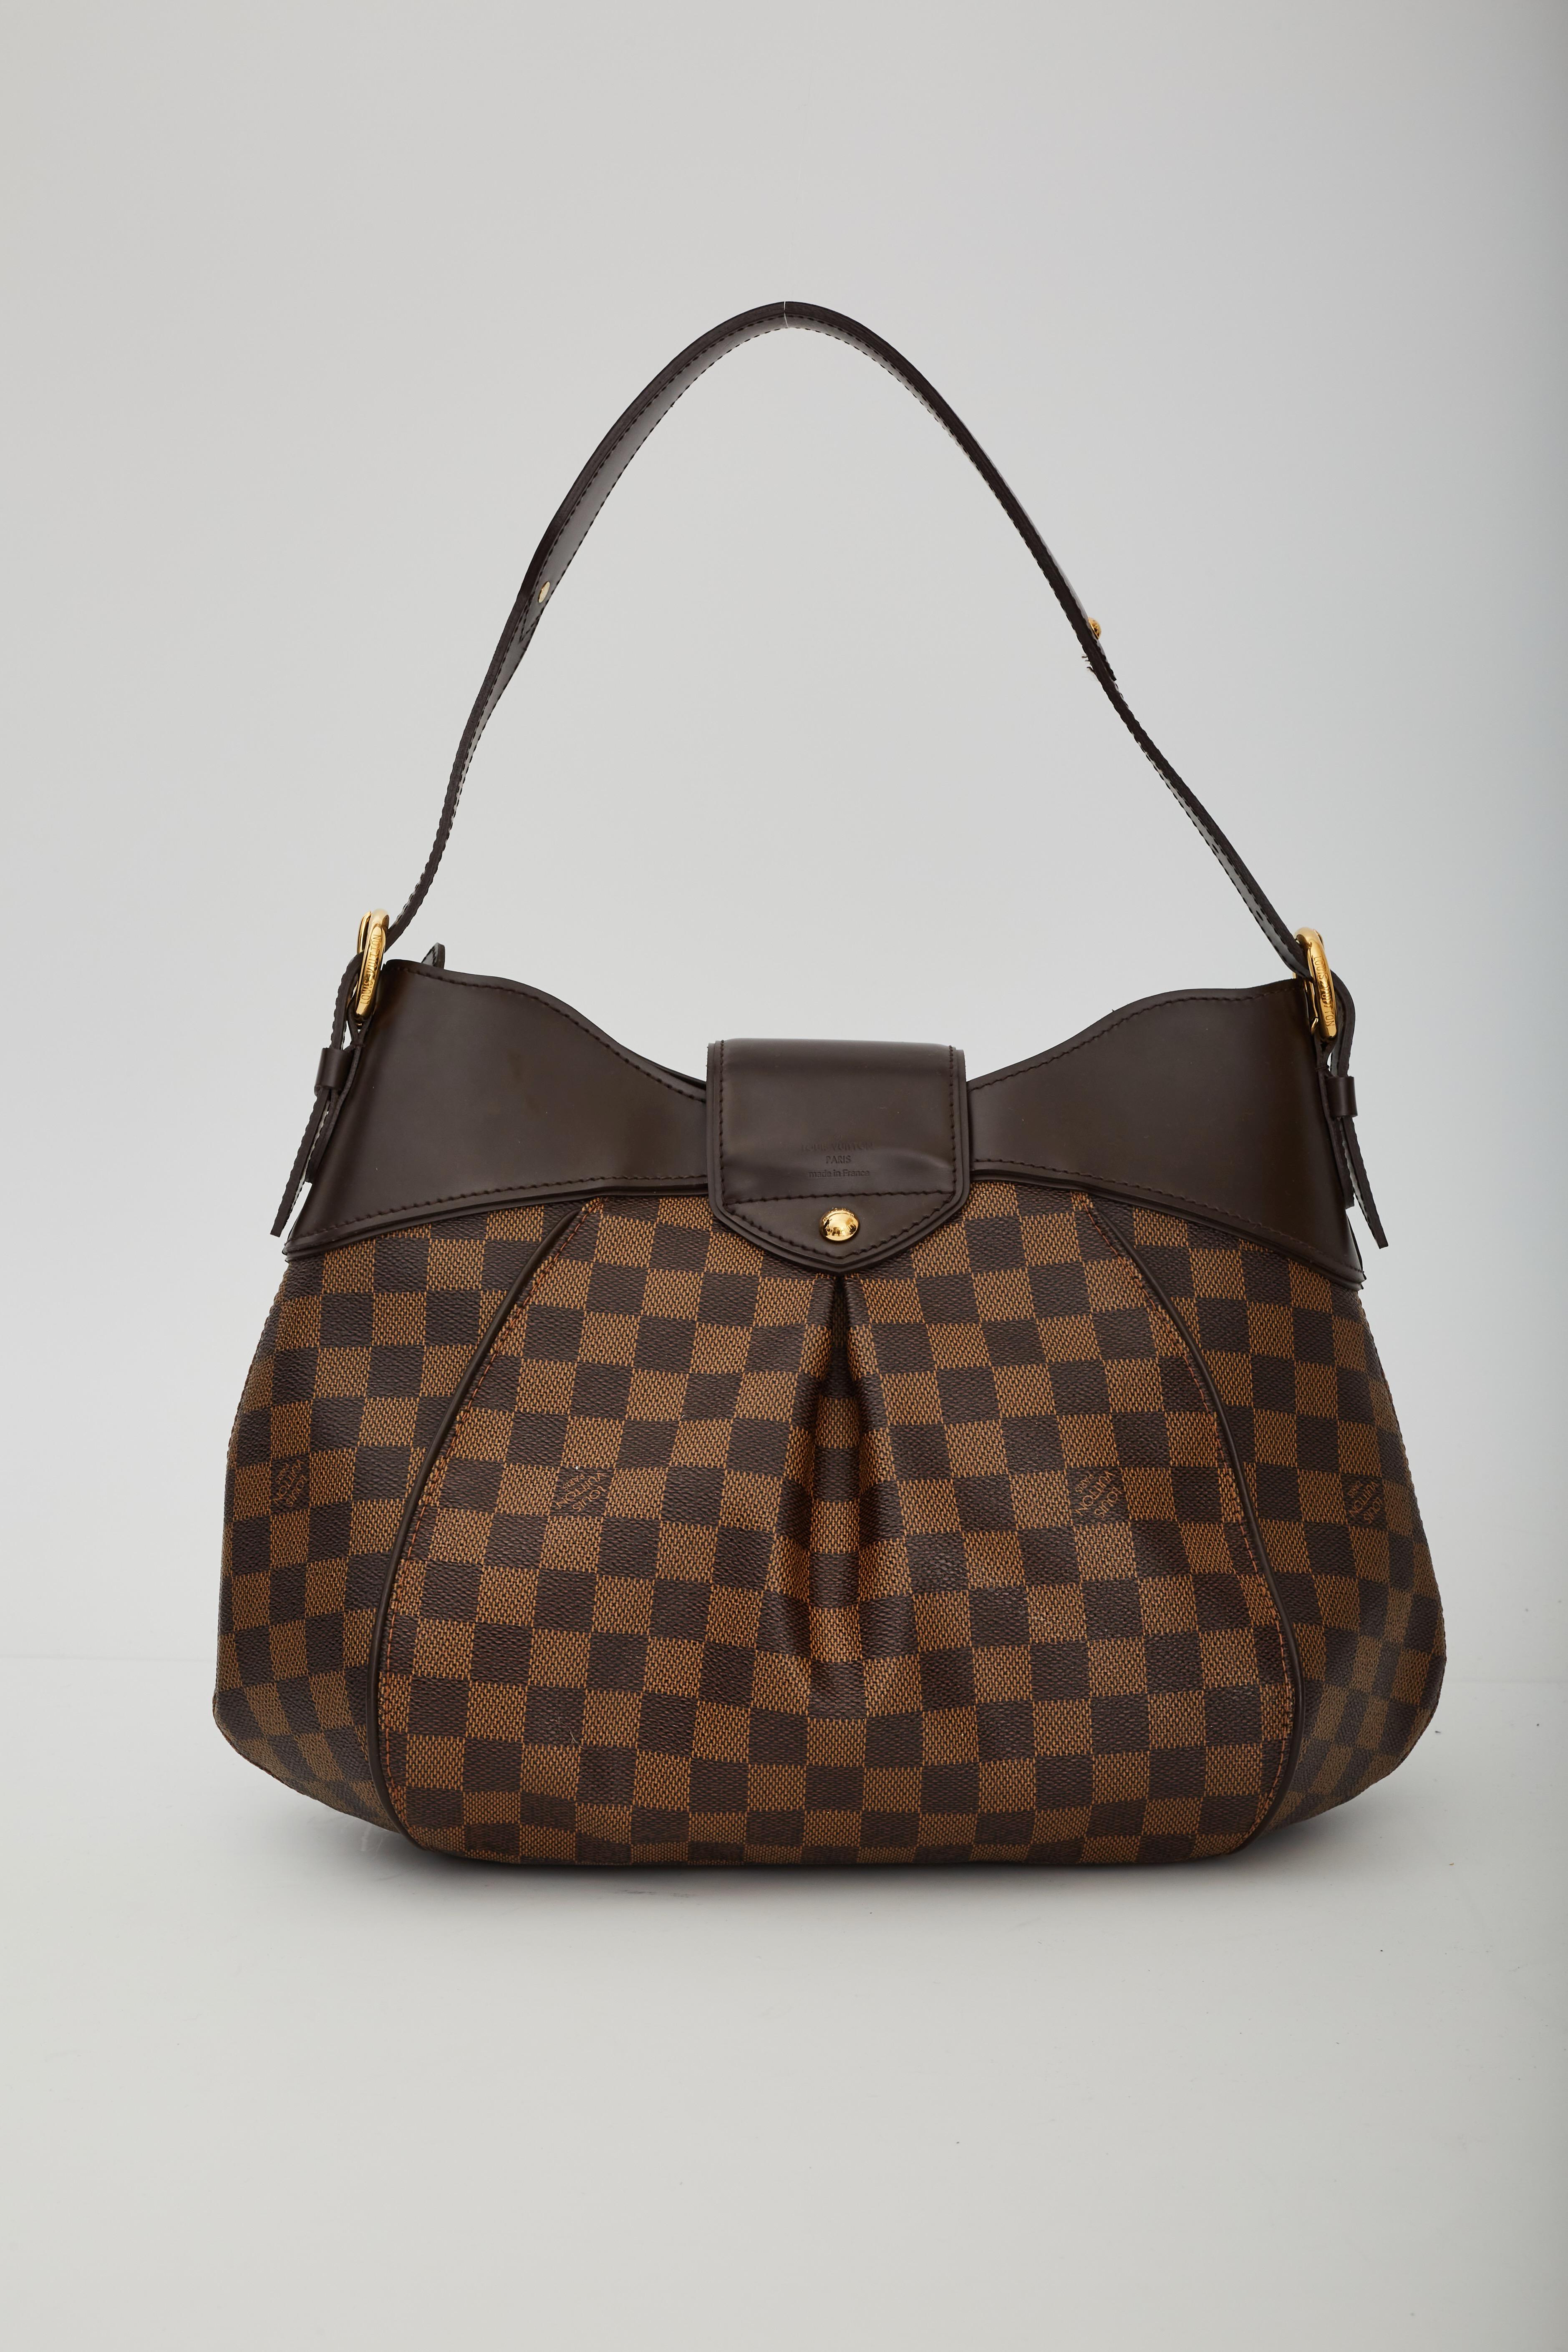 This shoulder bag is made of Louis Vuitton Damier check canvas. The bag features adjustable leather shoulder straps and trim. The bag opens with a gold press-lock and top zipper to a partitioned crimson red microfiber interior with pockets.

COLOR: